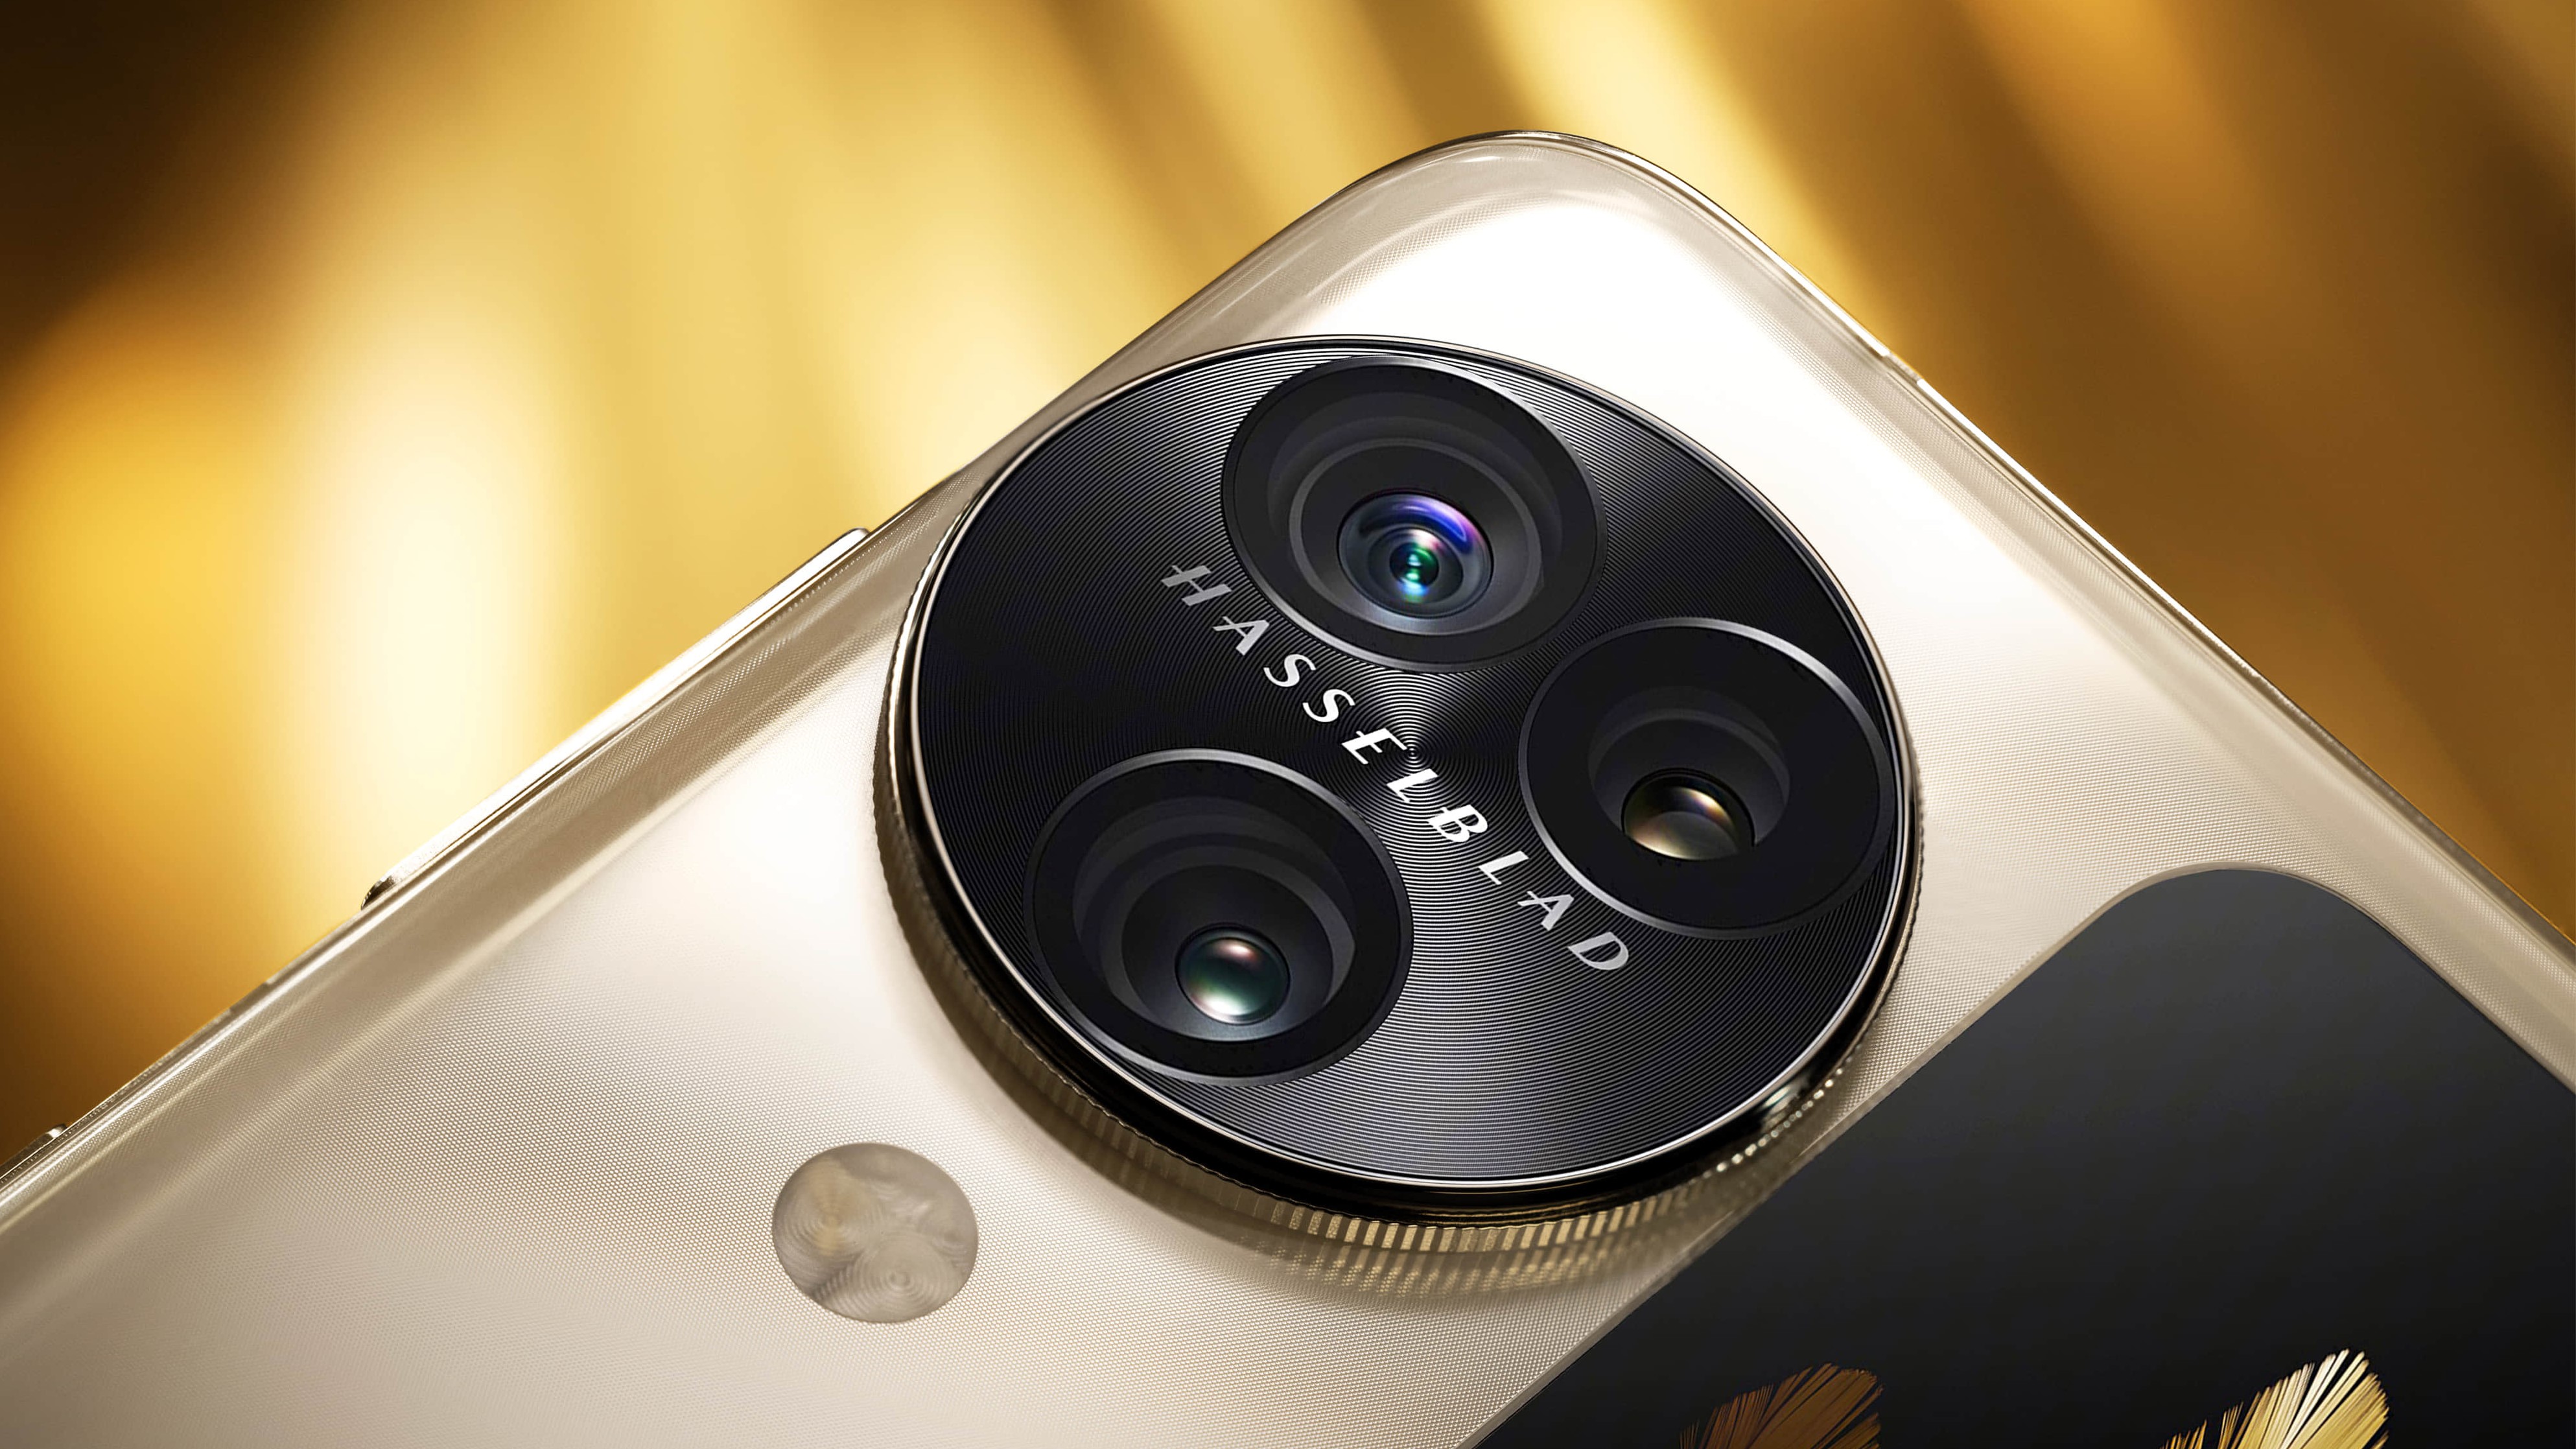 OPPO N3 Flip hyped as professional Hasselblad portrait-taking foldable smartphone prior to launch - Notebookcheck.net